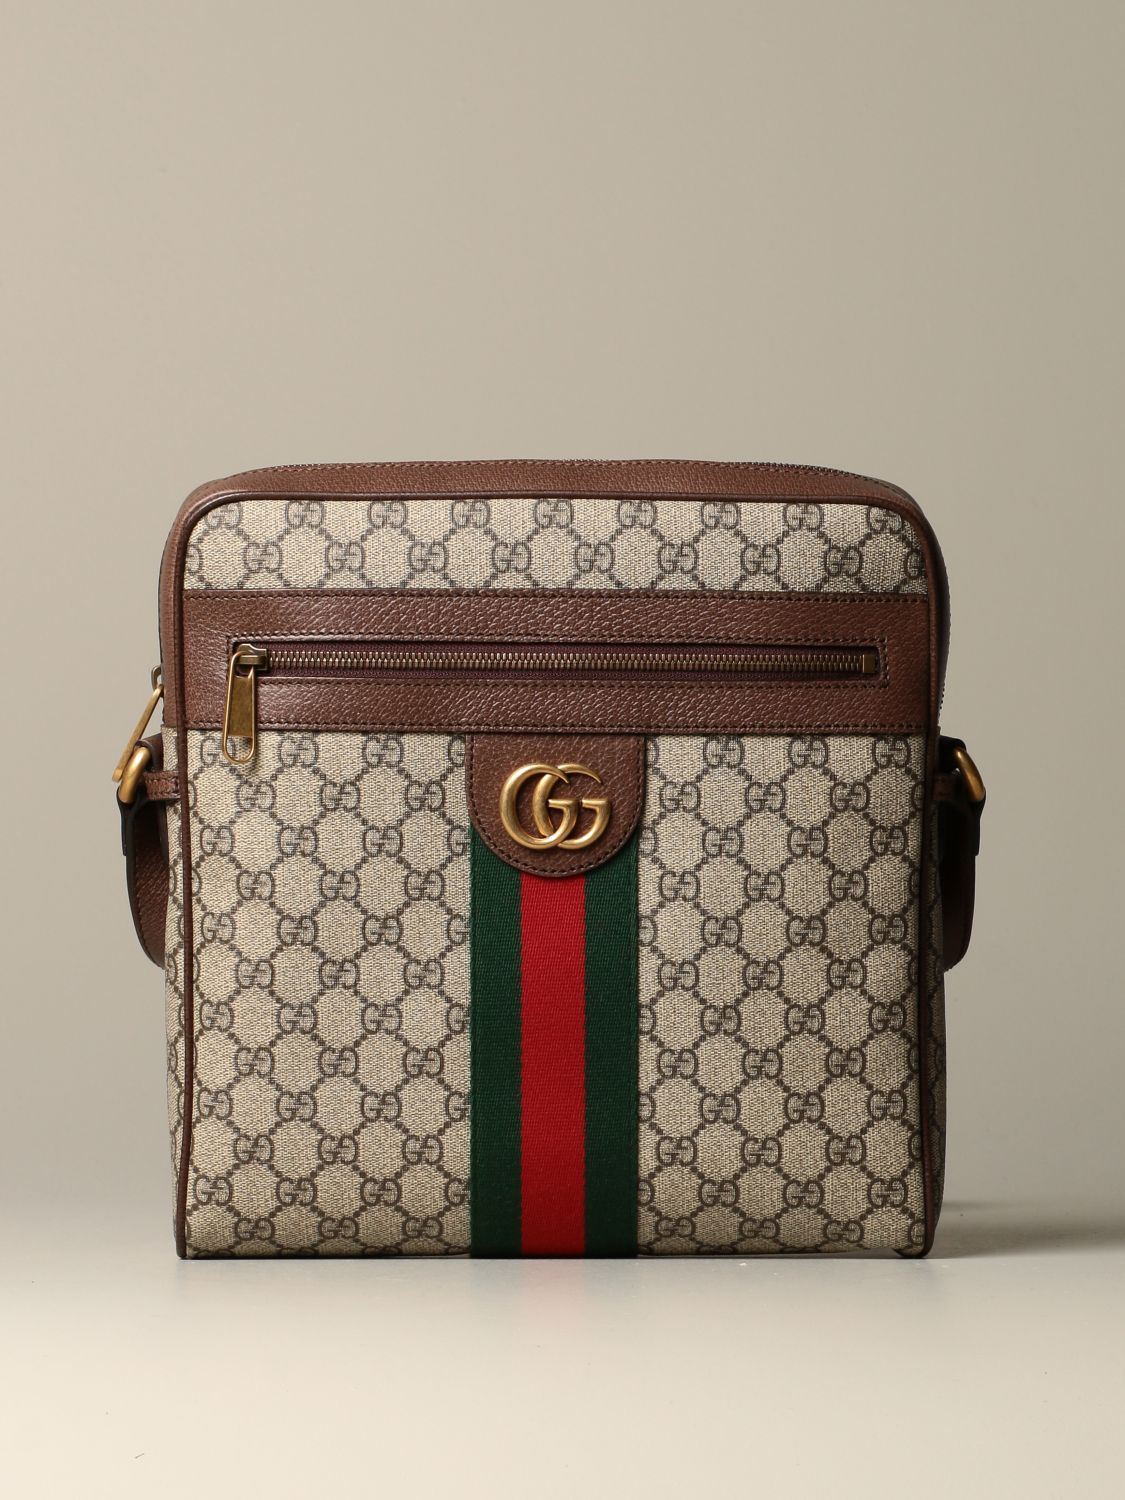 GUCCI: Ophidia GG Supreme bag with Web band - Beige | Gucci shoulder ...